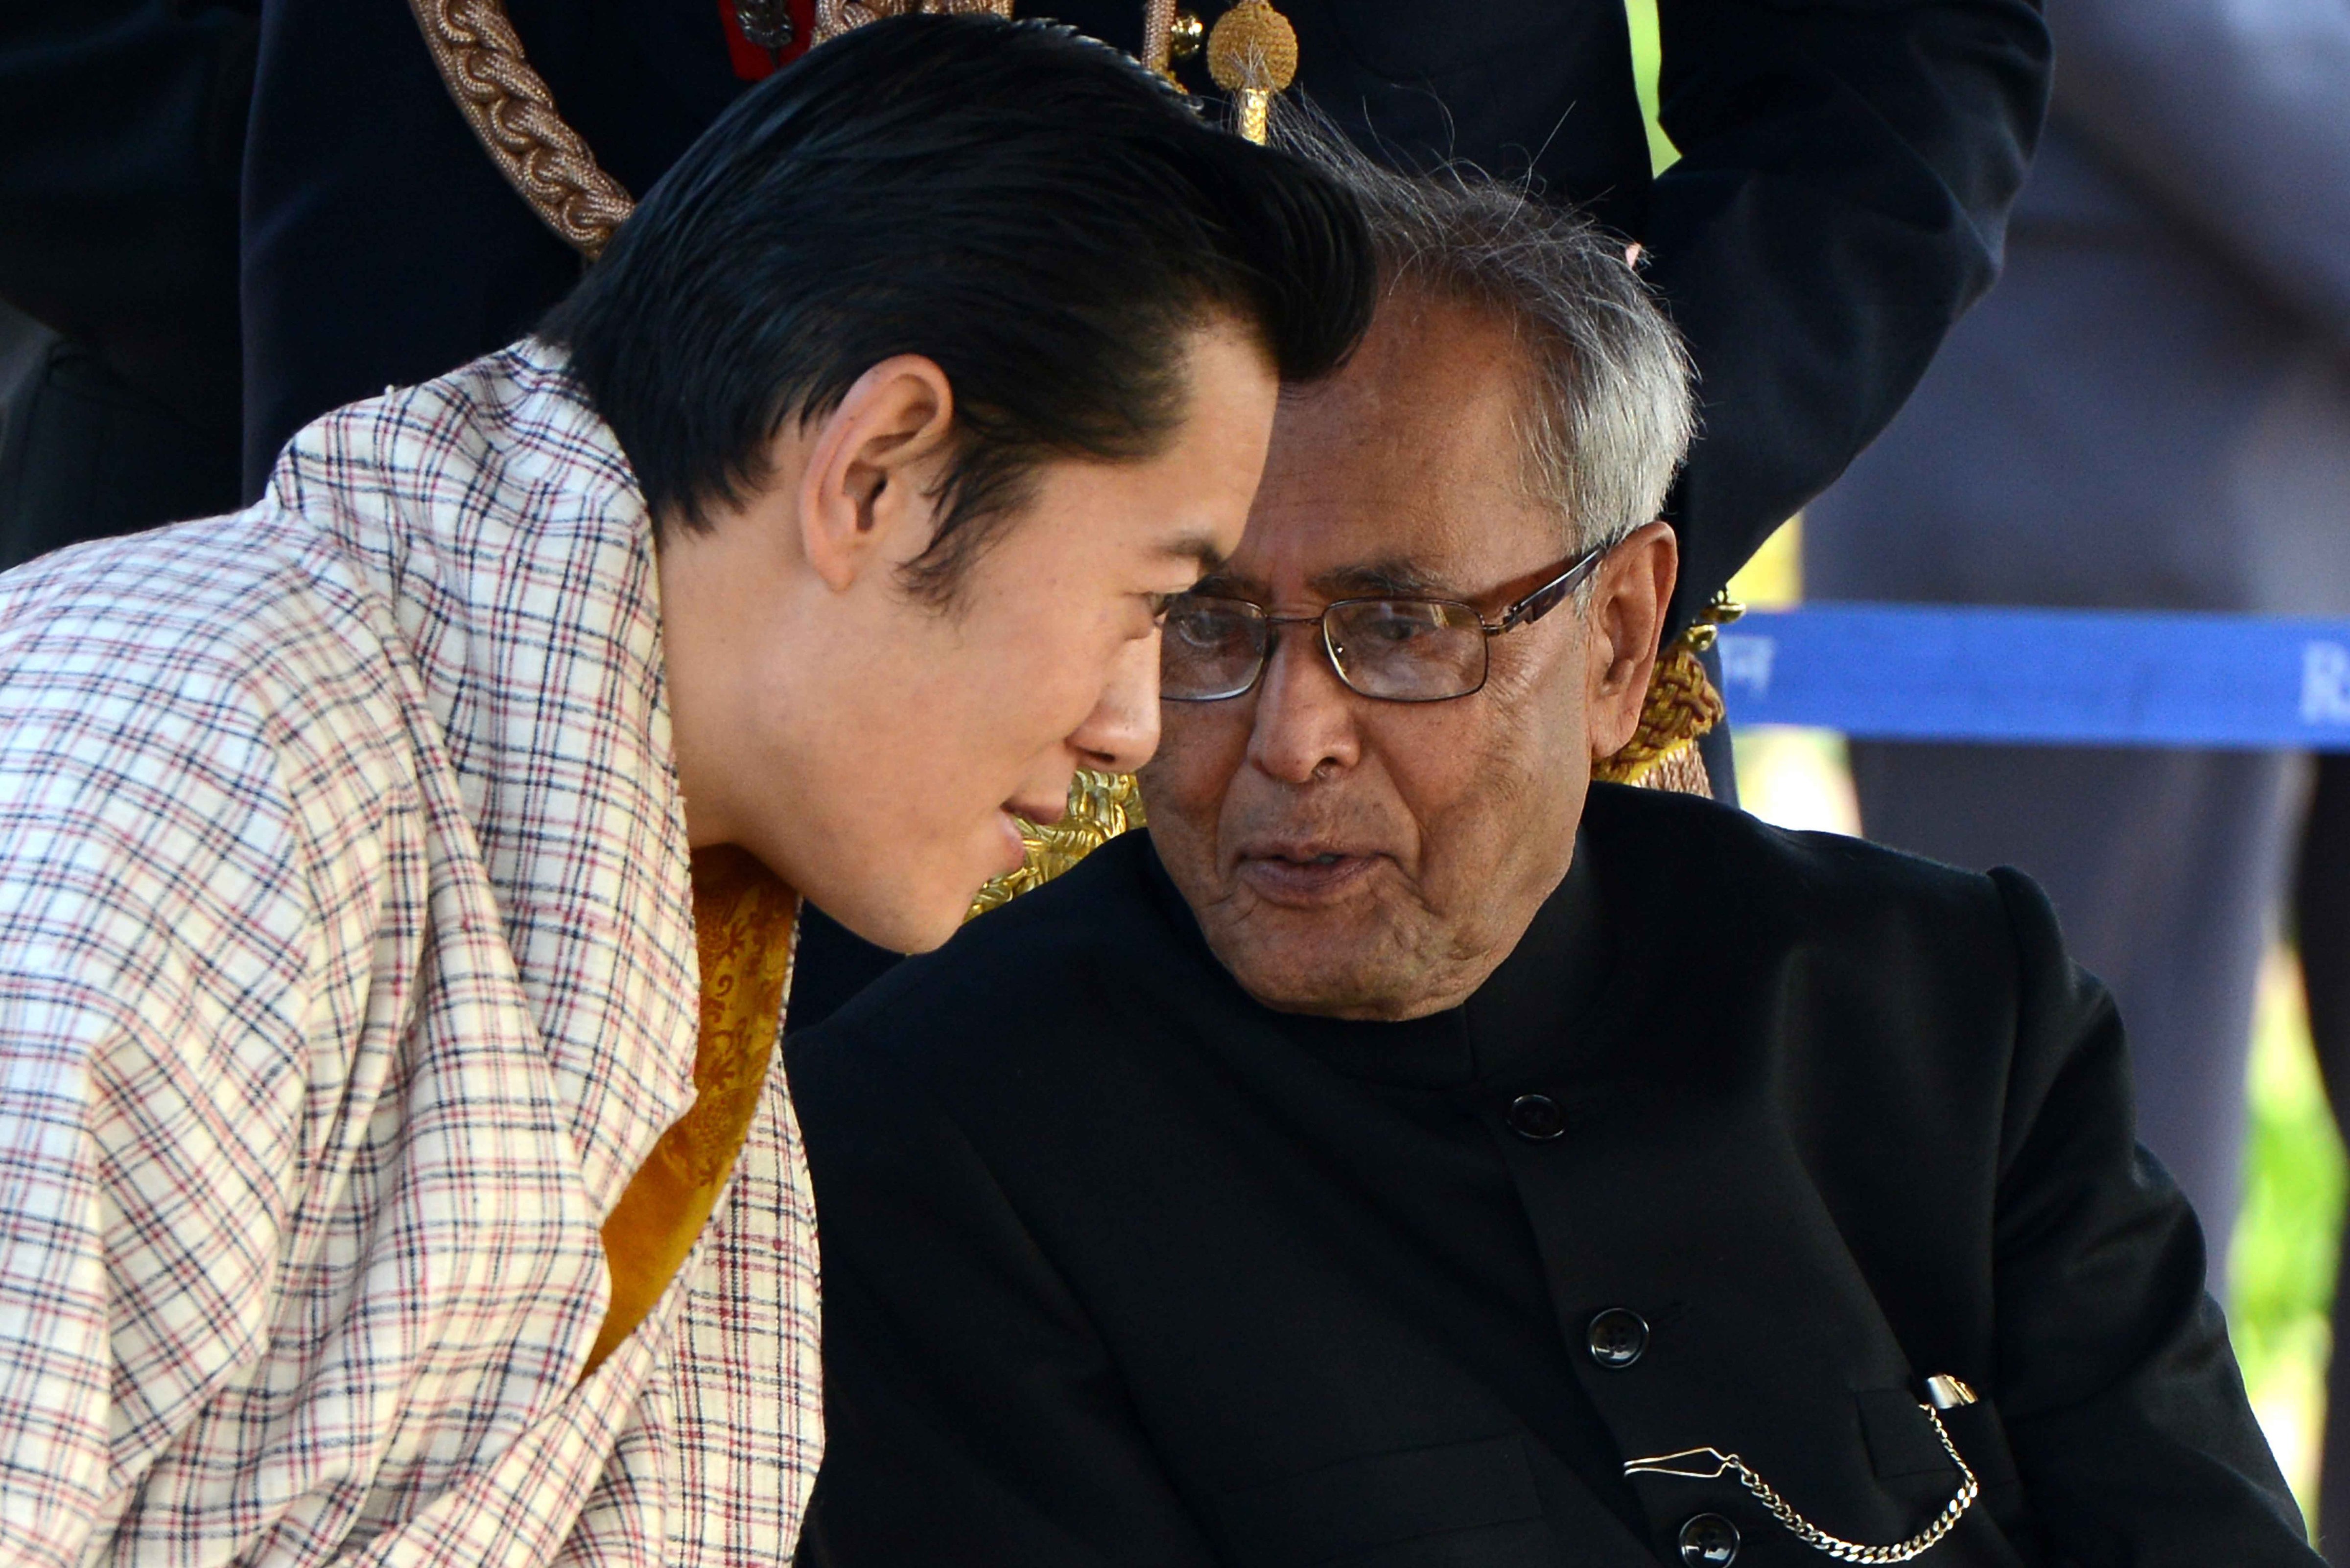 President Pranab Mukherjee with Chief Guest King of Bhutan, Jigme Kheser Namgyel Wangchuck, during At Home reception hosted by him on the occasion of 64th Republic Day at Rashtrapati Bhavan in New Delhi on Saturday. (Shekhar Yadav/India Today Group/Getty Images)